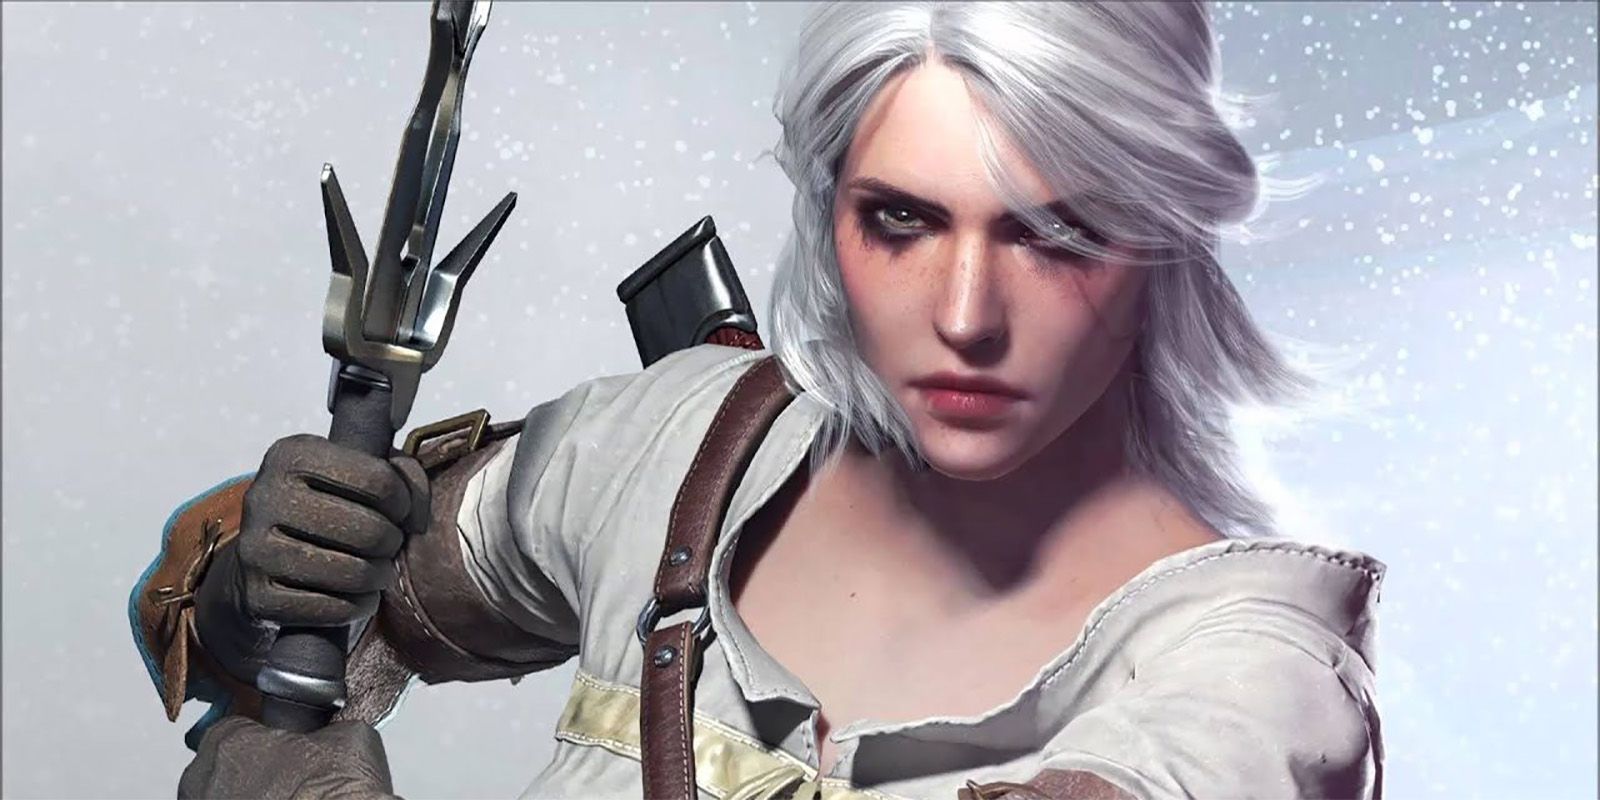 Cirilla of Cintra from The Witcher games, wielding a sword